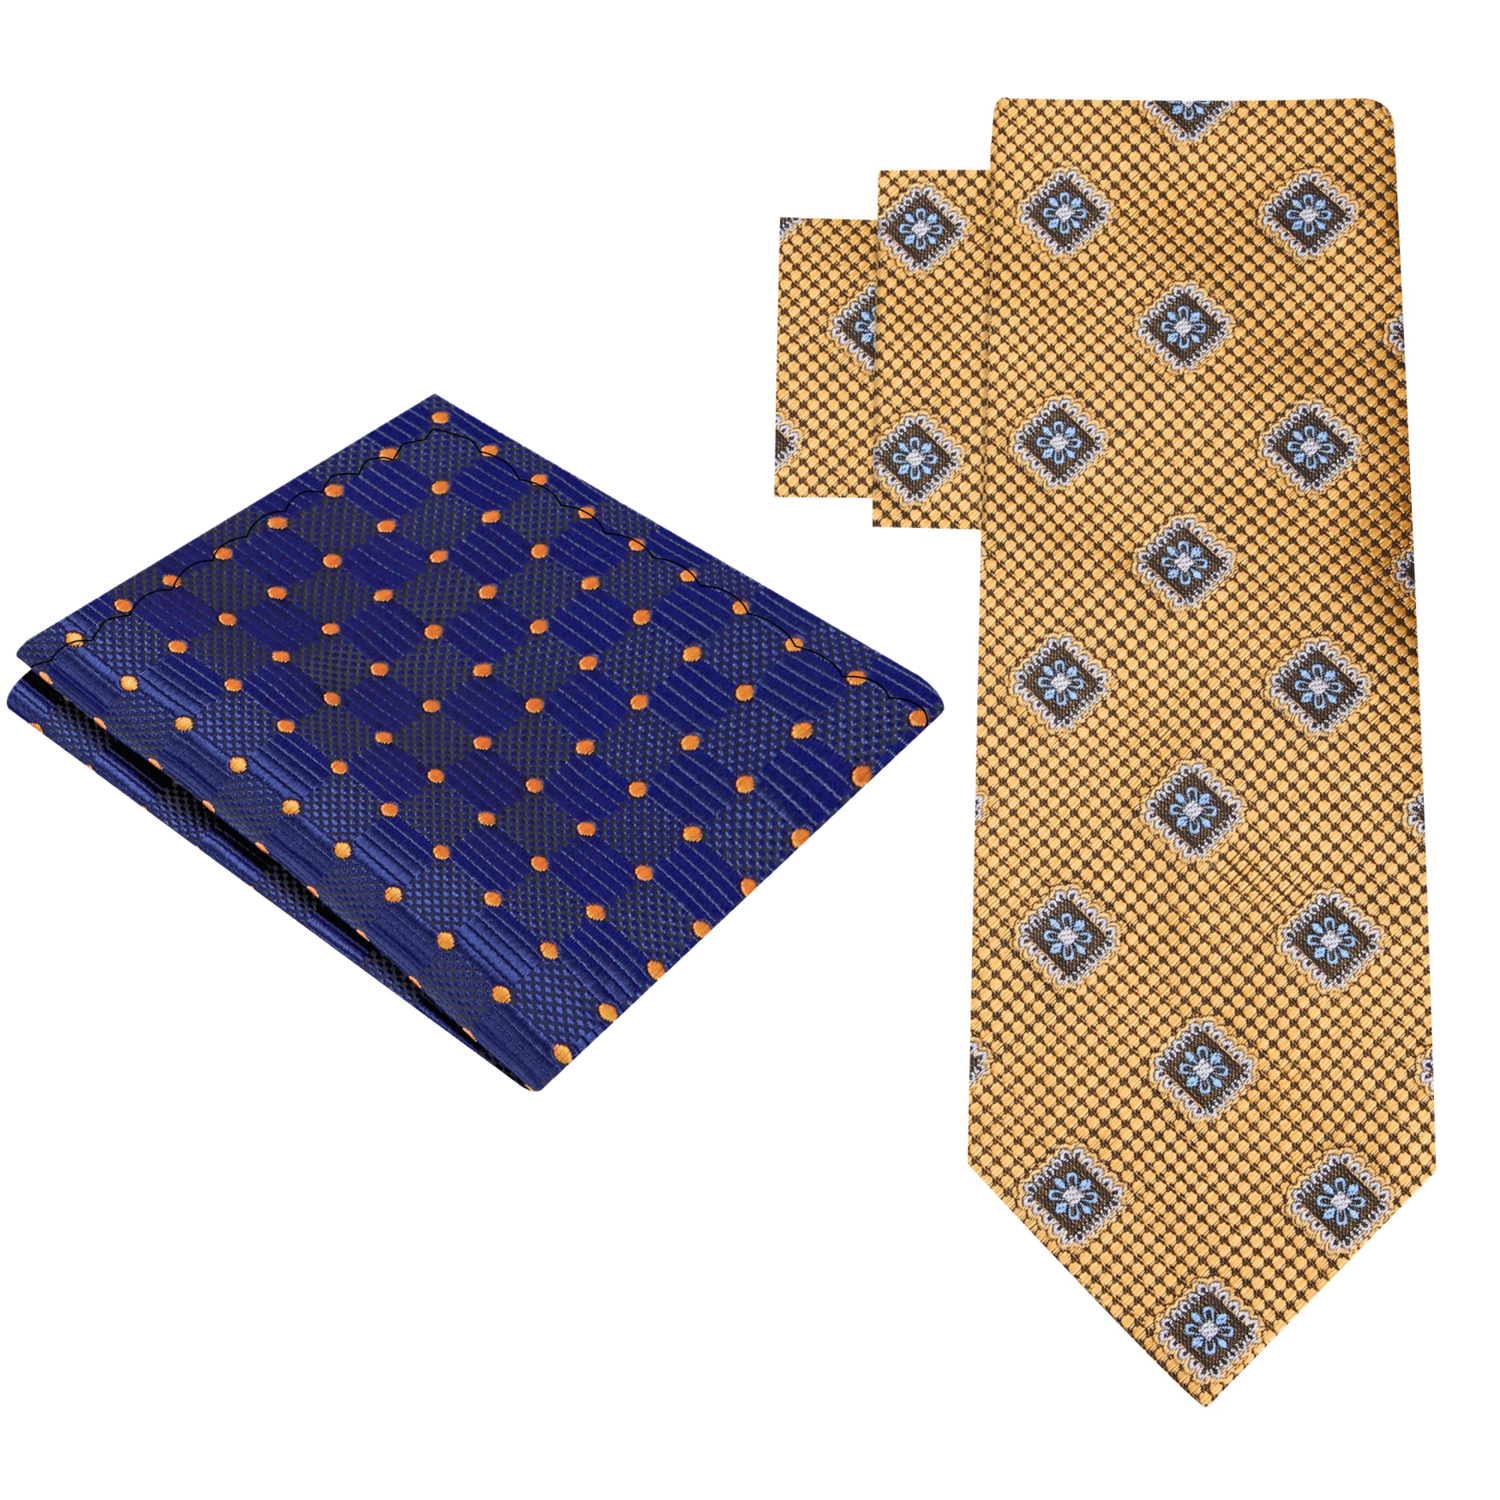 Alt: Gold Medallions Necktie and Accenting Blue and Gold Square